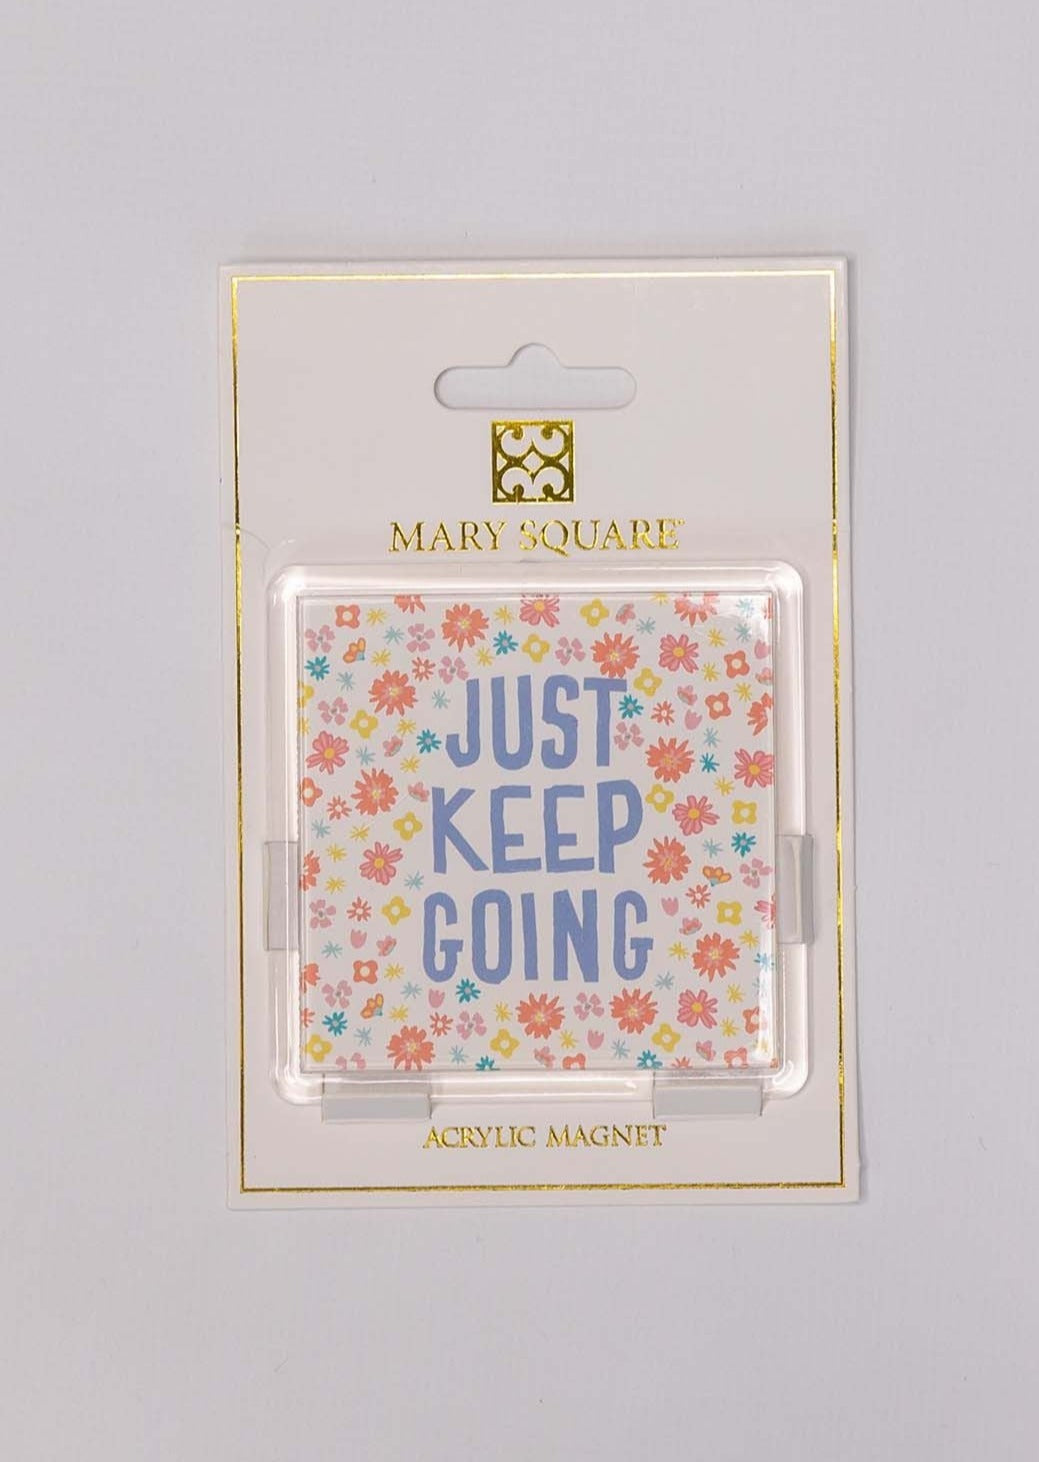 Inspirational Magnets Home & Lifestyle Mary Square Keep Going